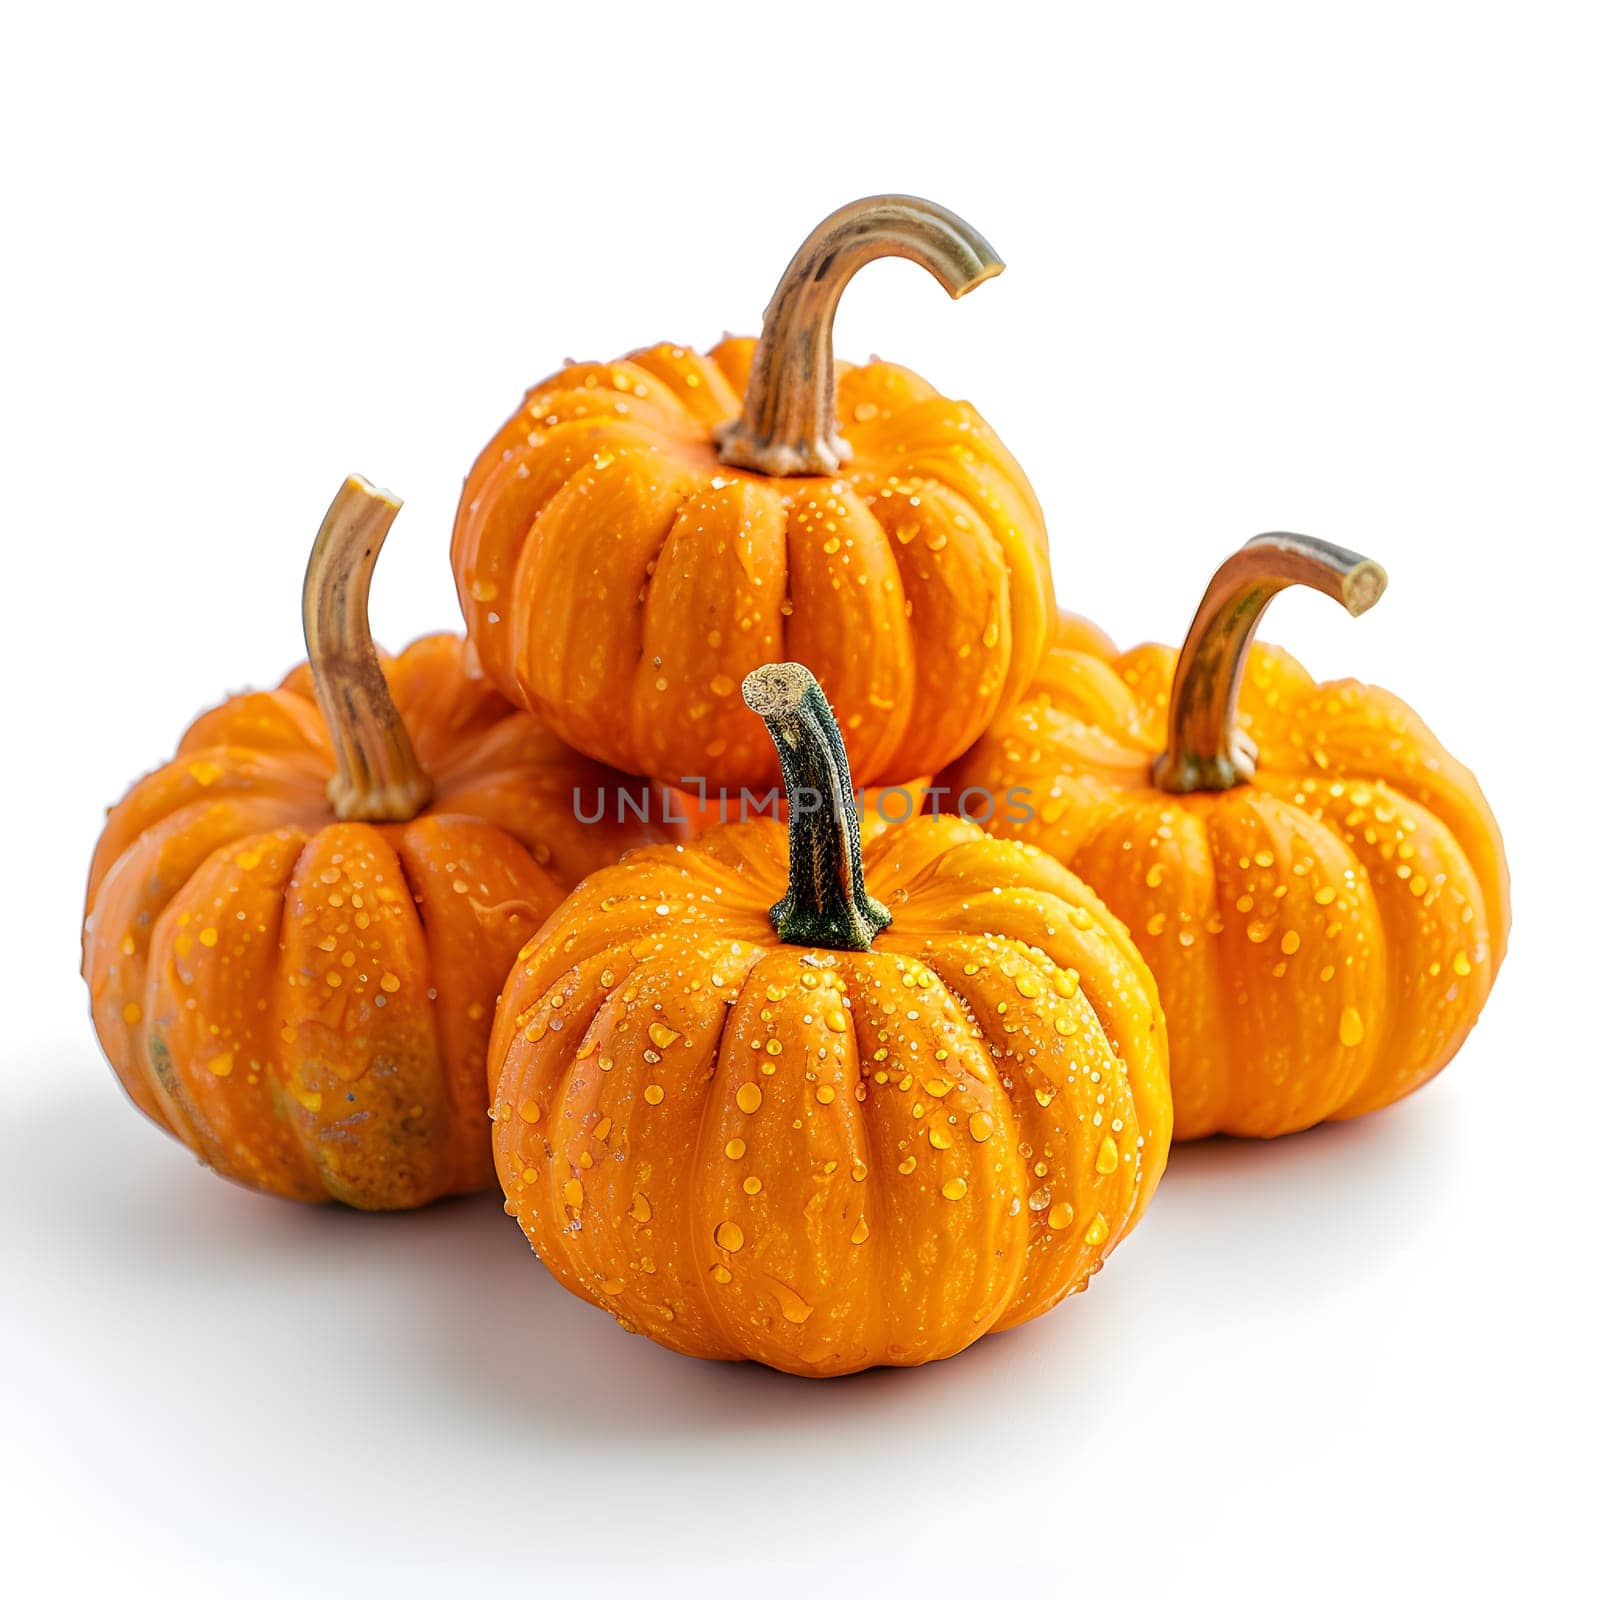 Four small pumpkins, a type of winter squash, are neatly stacked on top of each other against a white background. Pumpkins are a staple food and a type of gourd known for their vibrant orange color